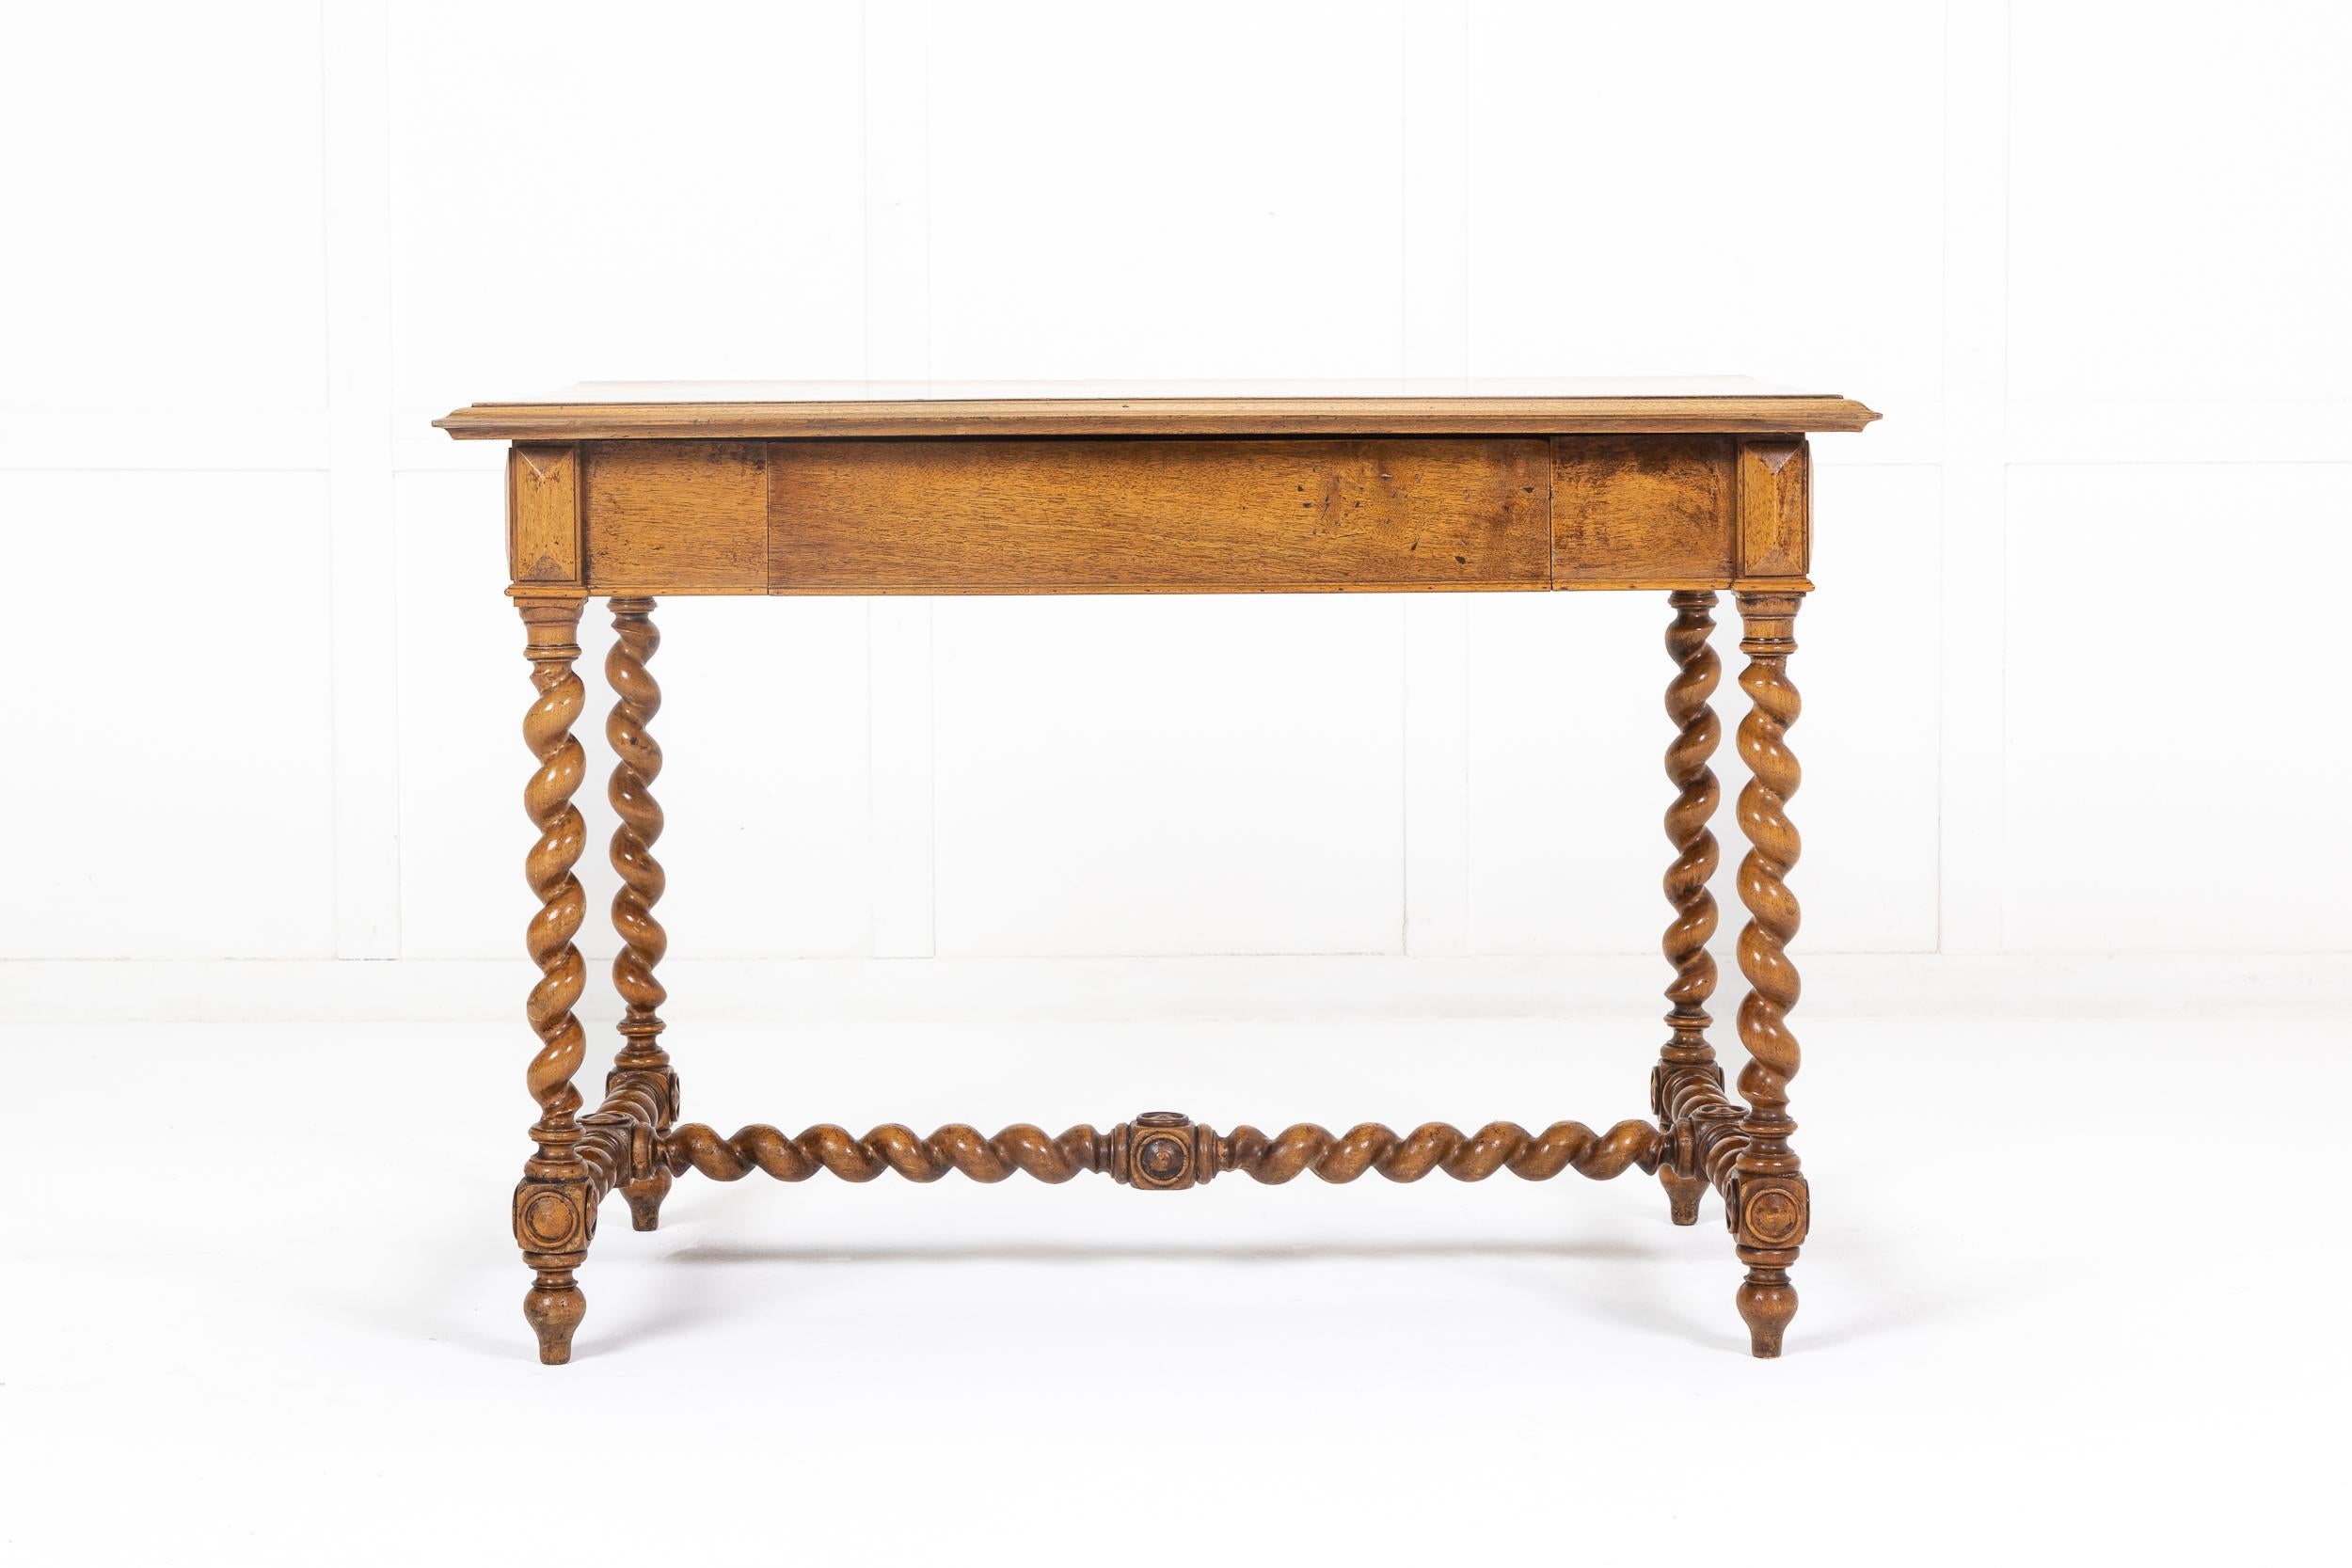 19th century French walnut side table having a rectangular moulded plank top. The frieze has a single, concealed central drawer. Supported by elegant clockwise and counter-clockwise barley twist legs, connected by a turned traditional